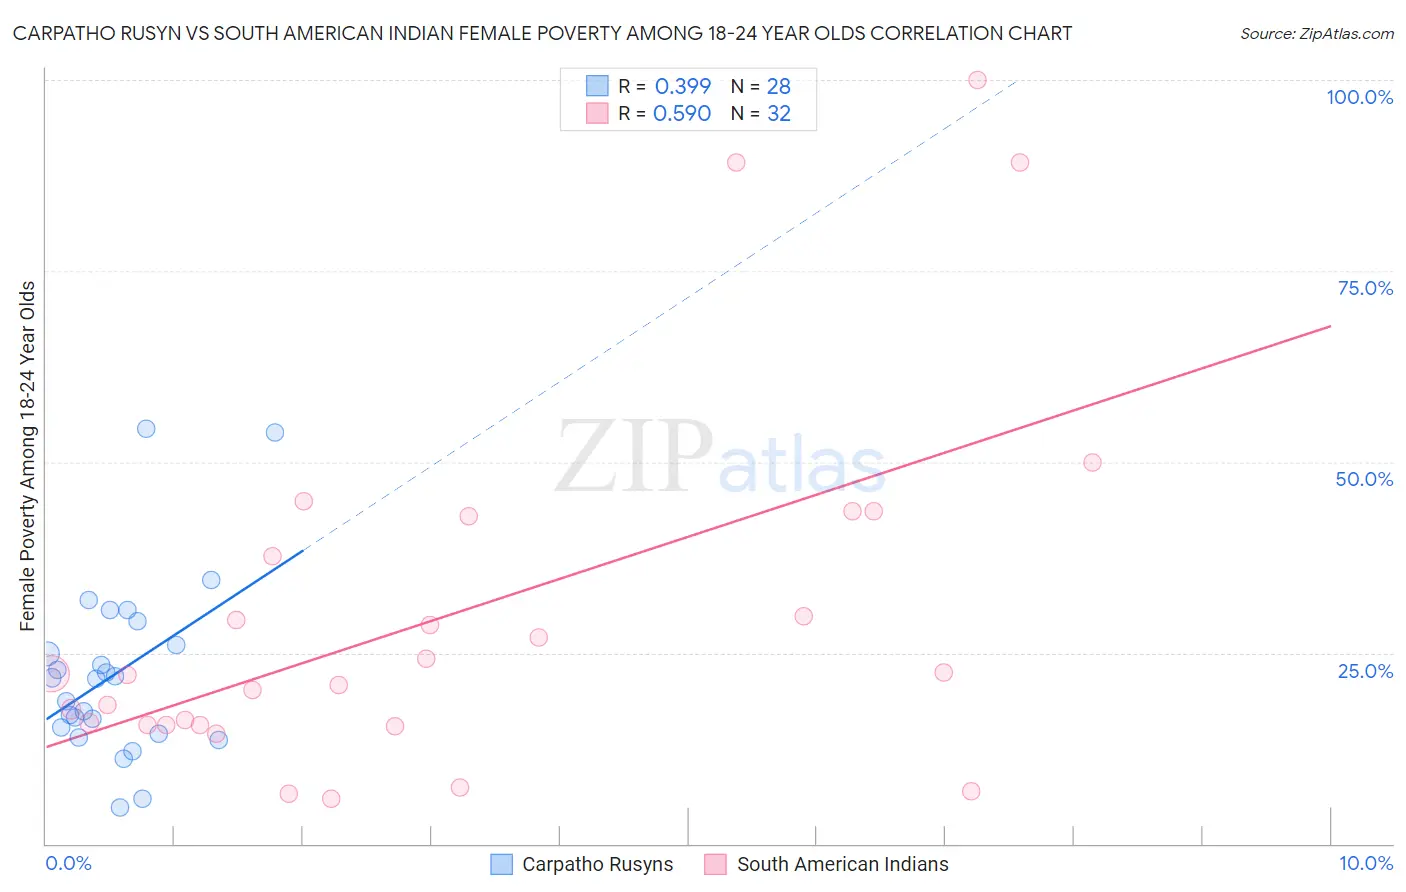 Carpatho Rusyn vs South American Indian Female Poverty Among 18-24 Year Olds